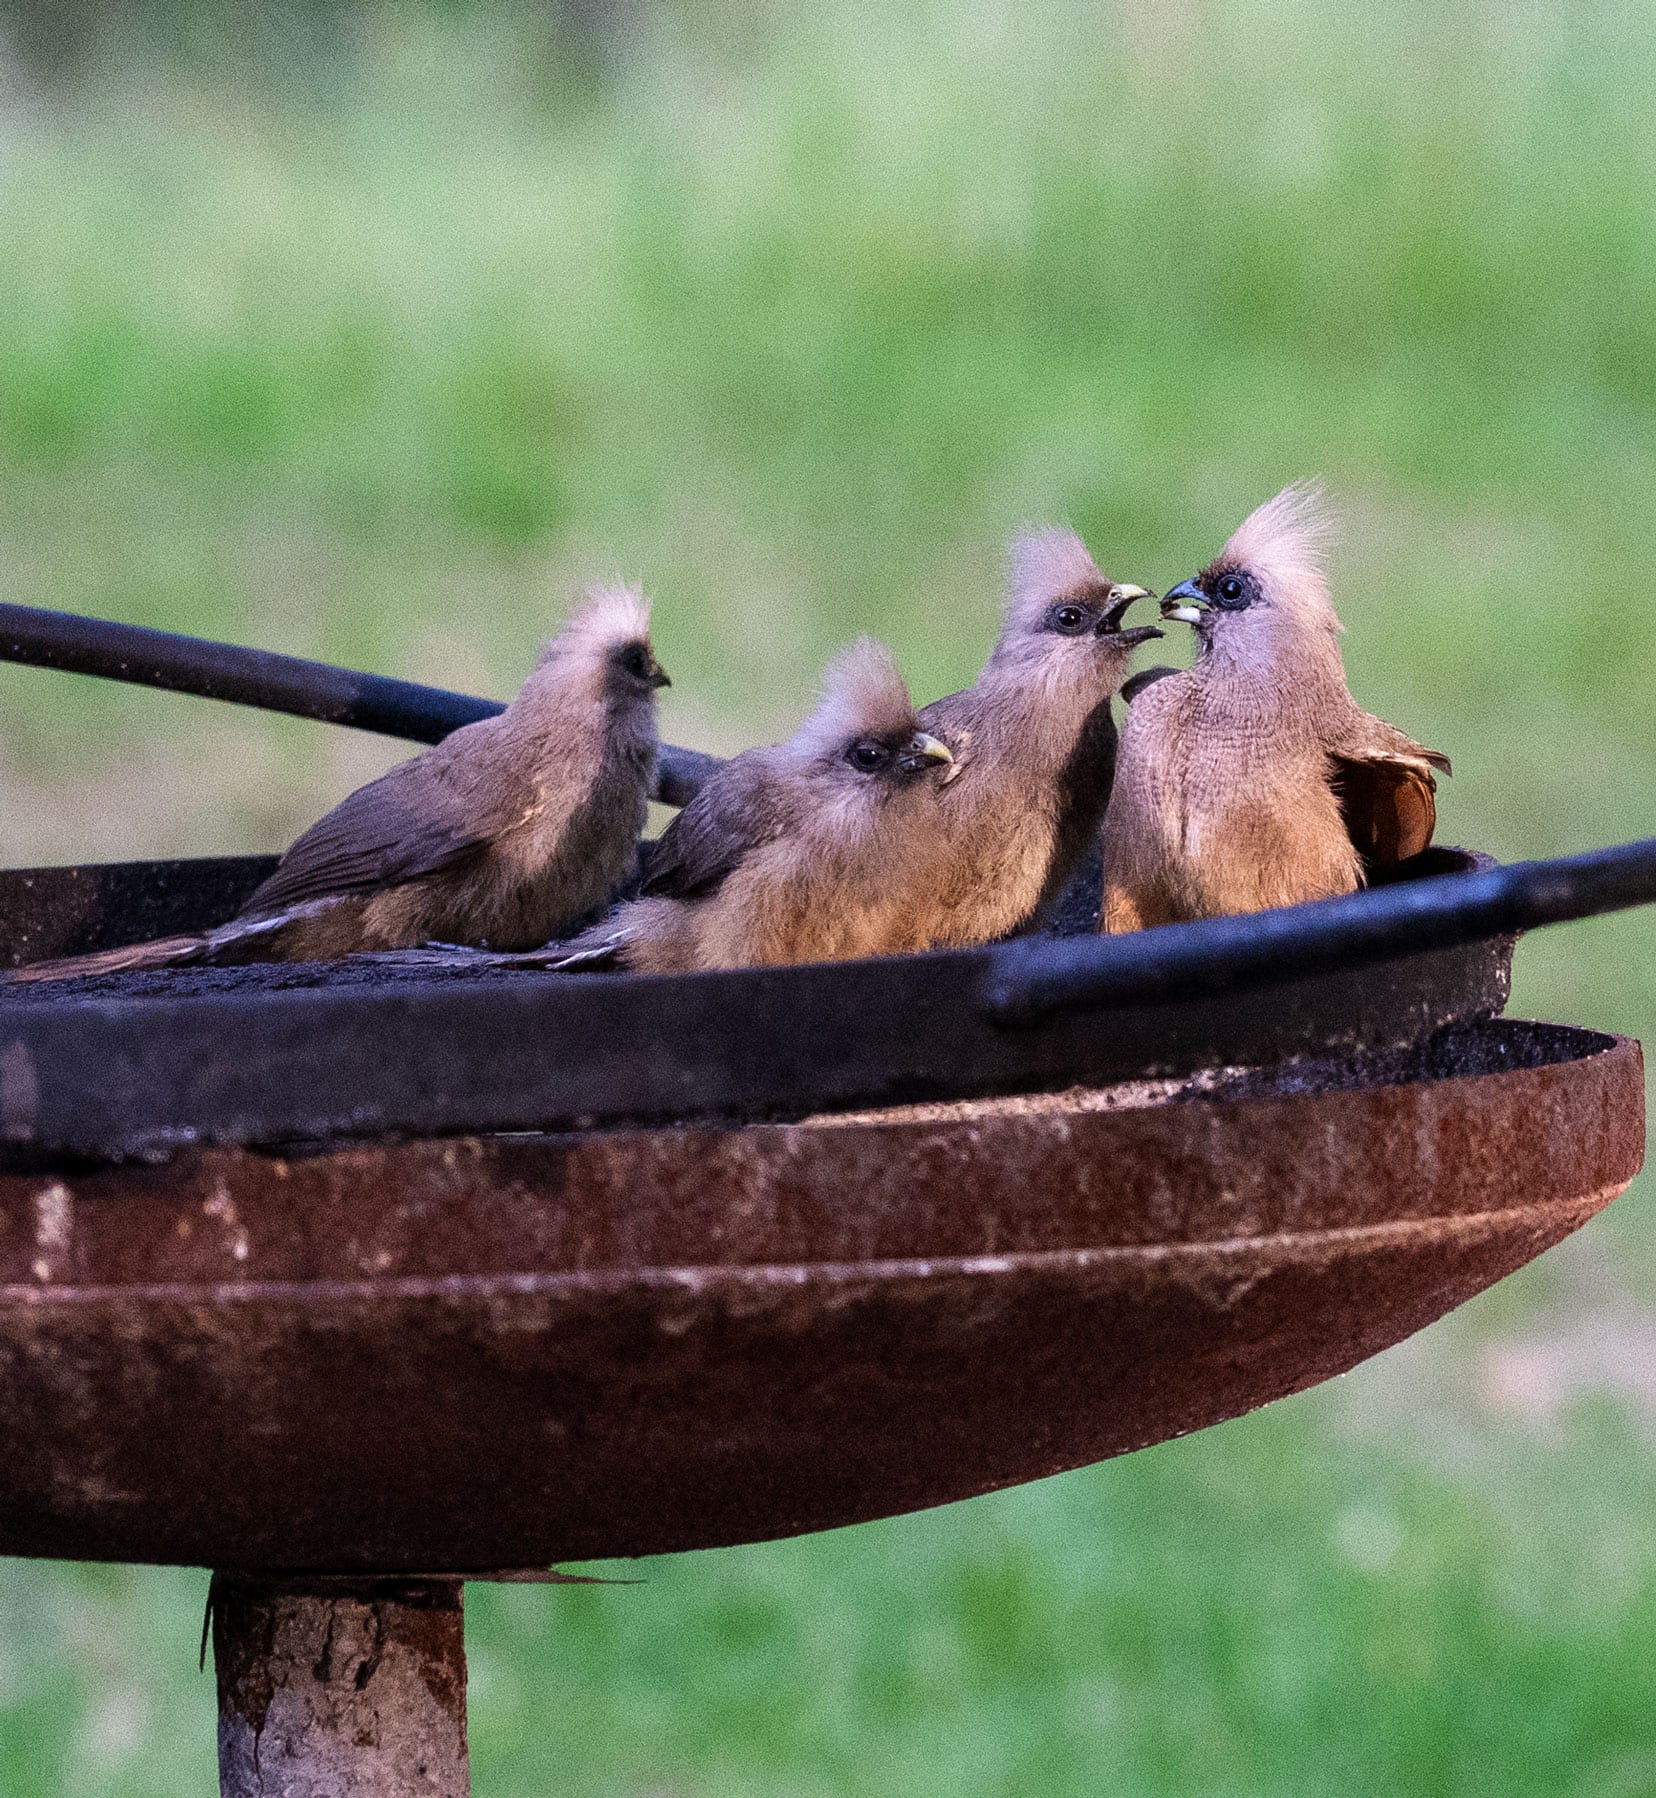 Speckled mousebirds feeding their babies and all sat on a barbeque pan